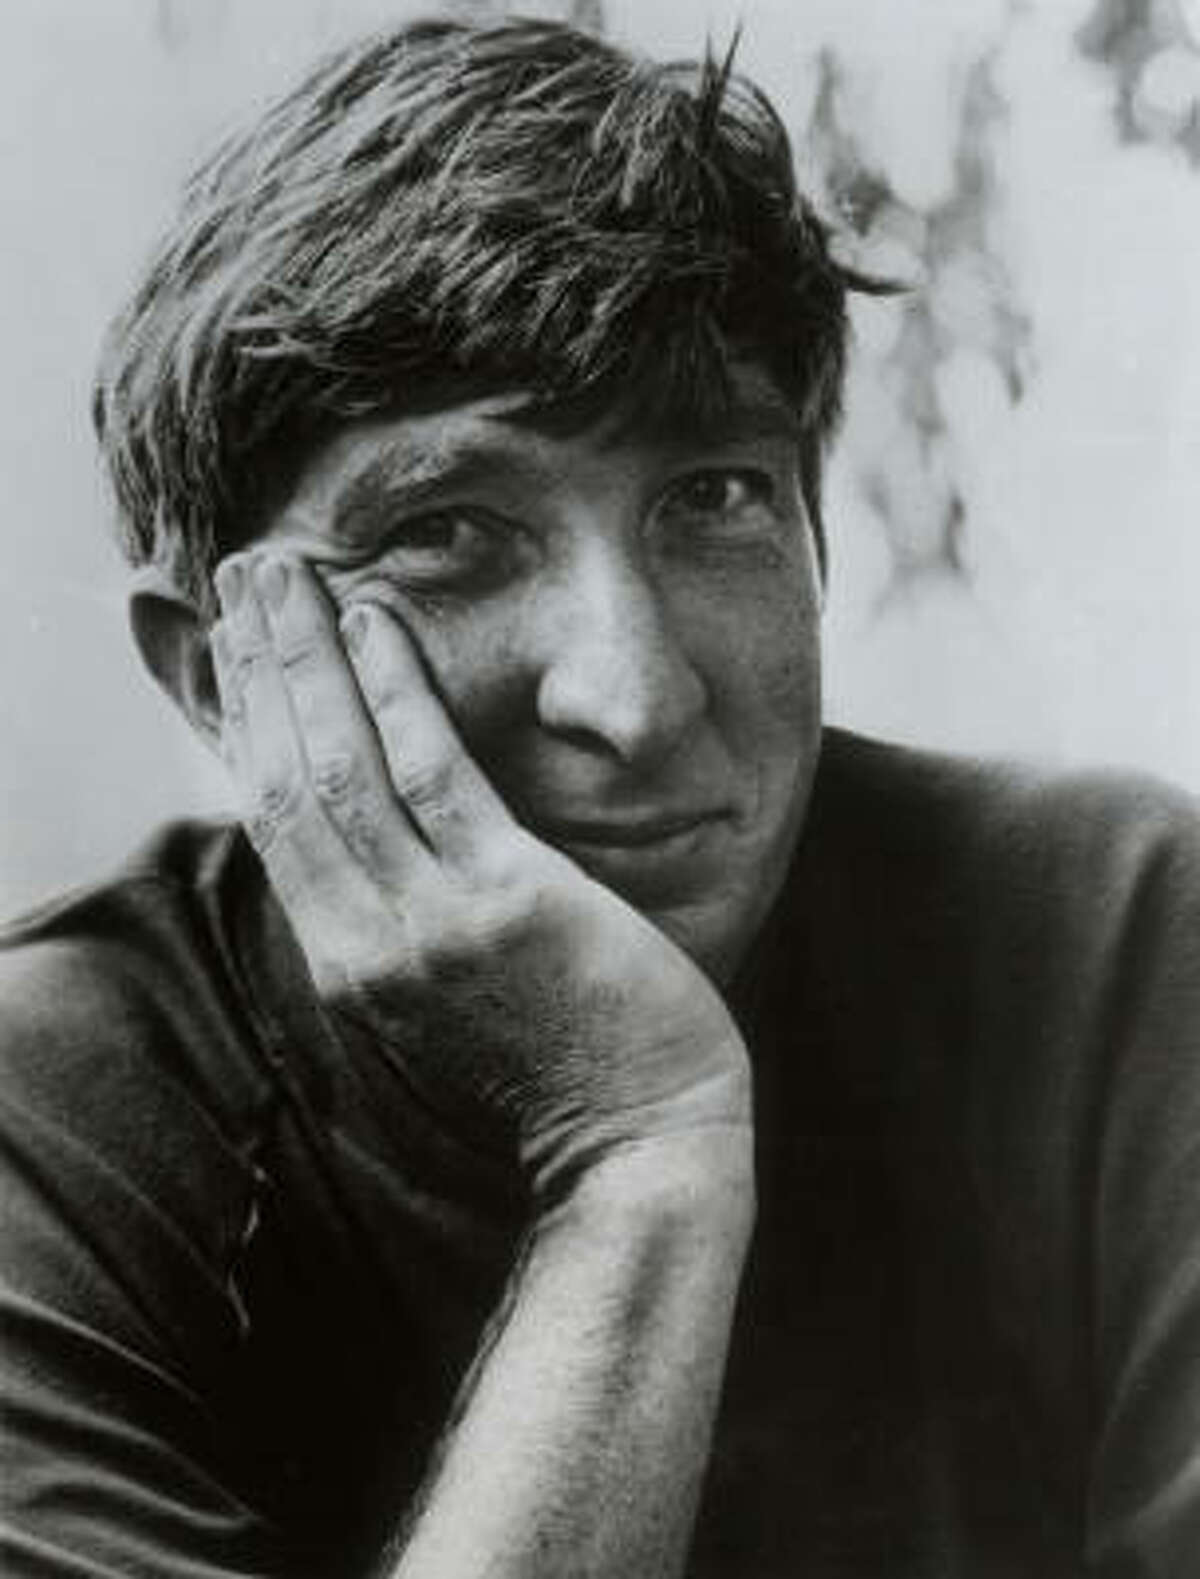 In a career that spanned half a century, Updike twice won the Pulitzer Prize and National Book Award.